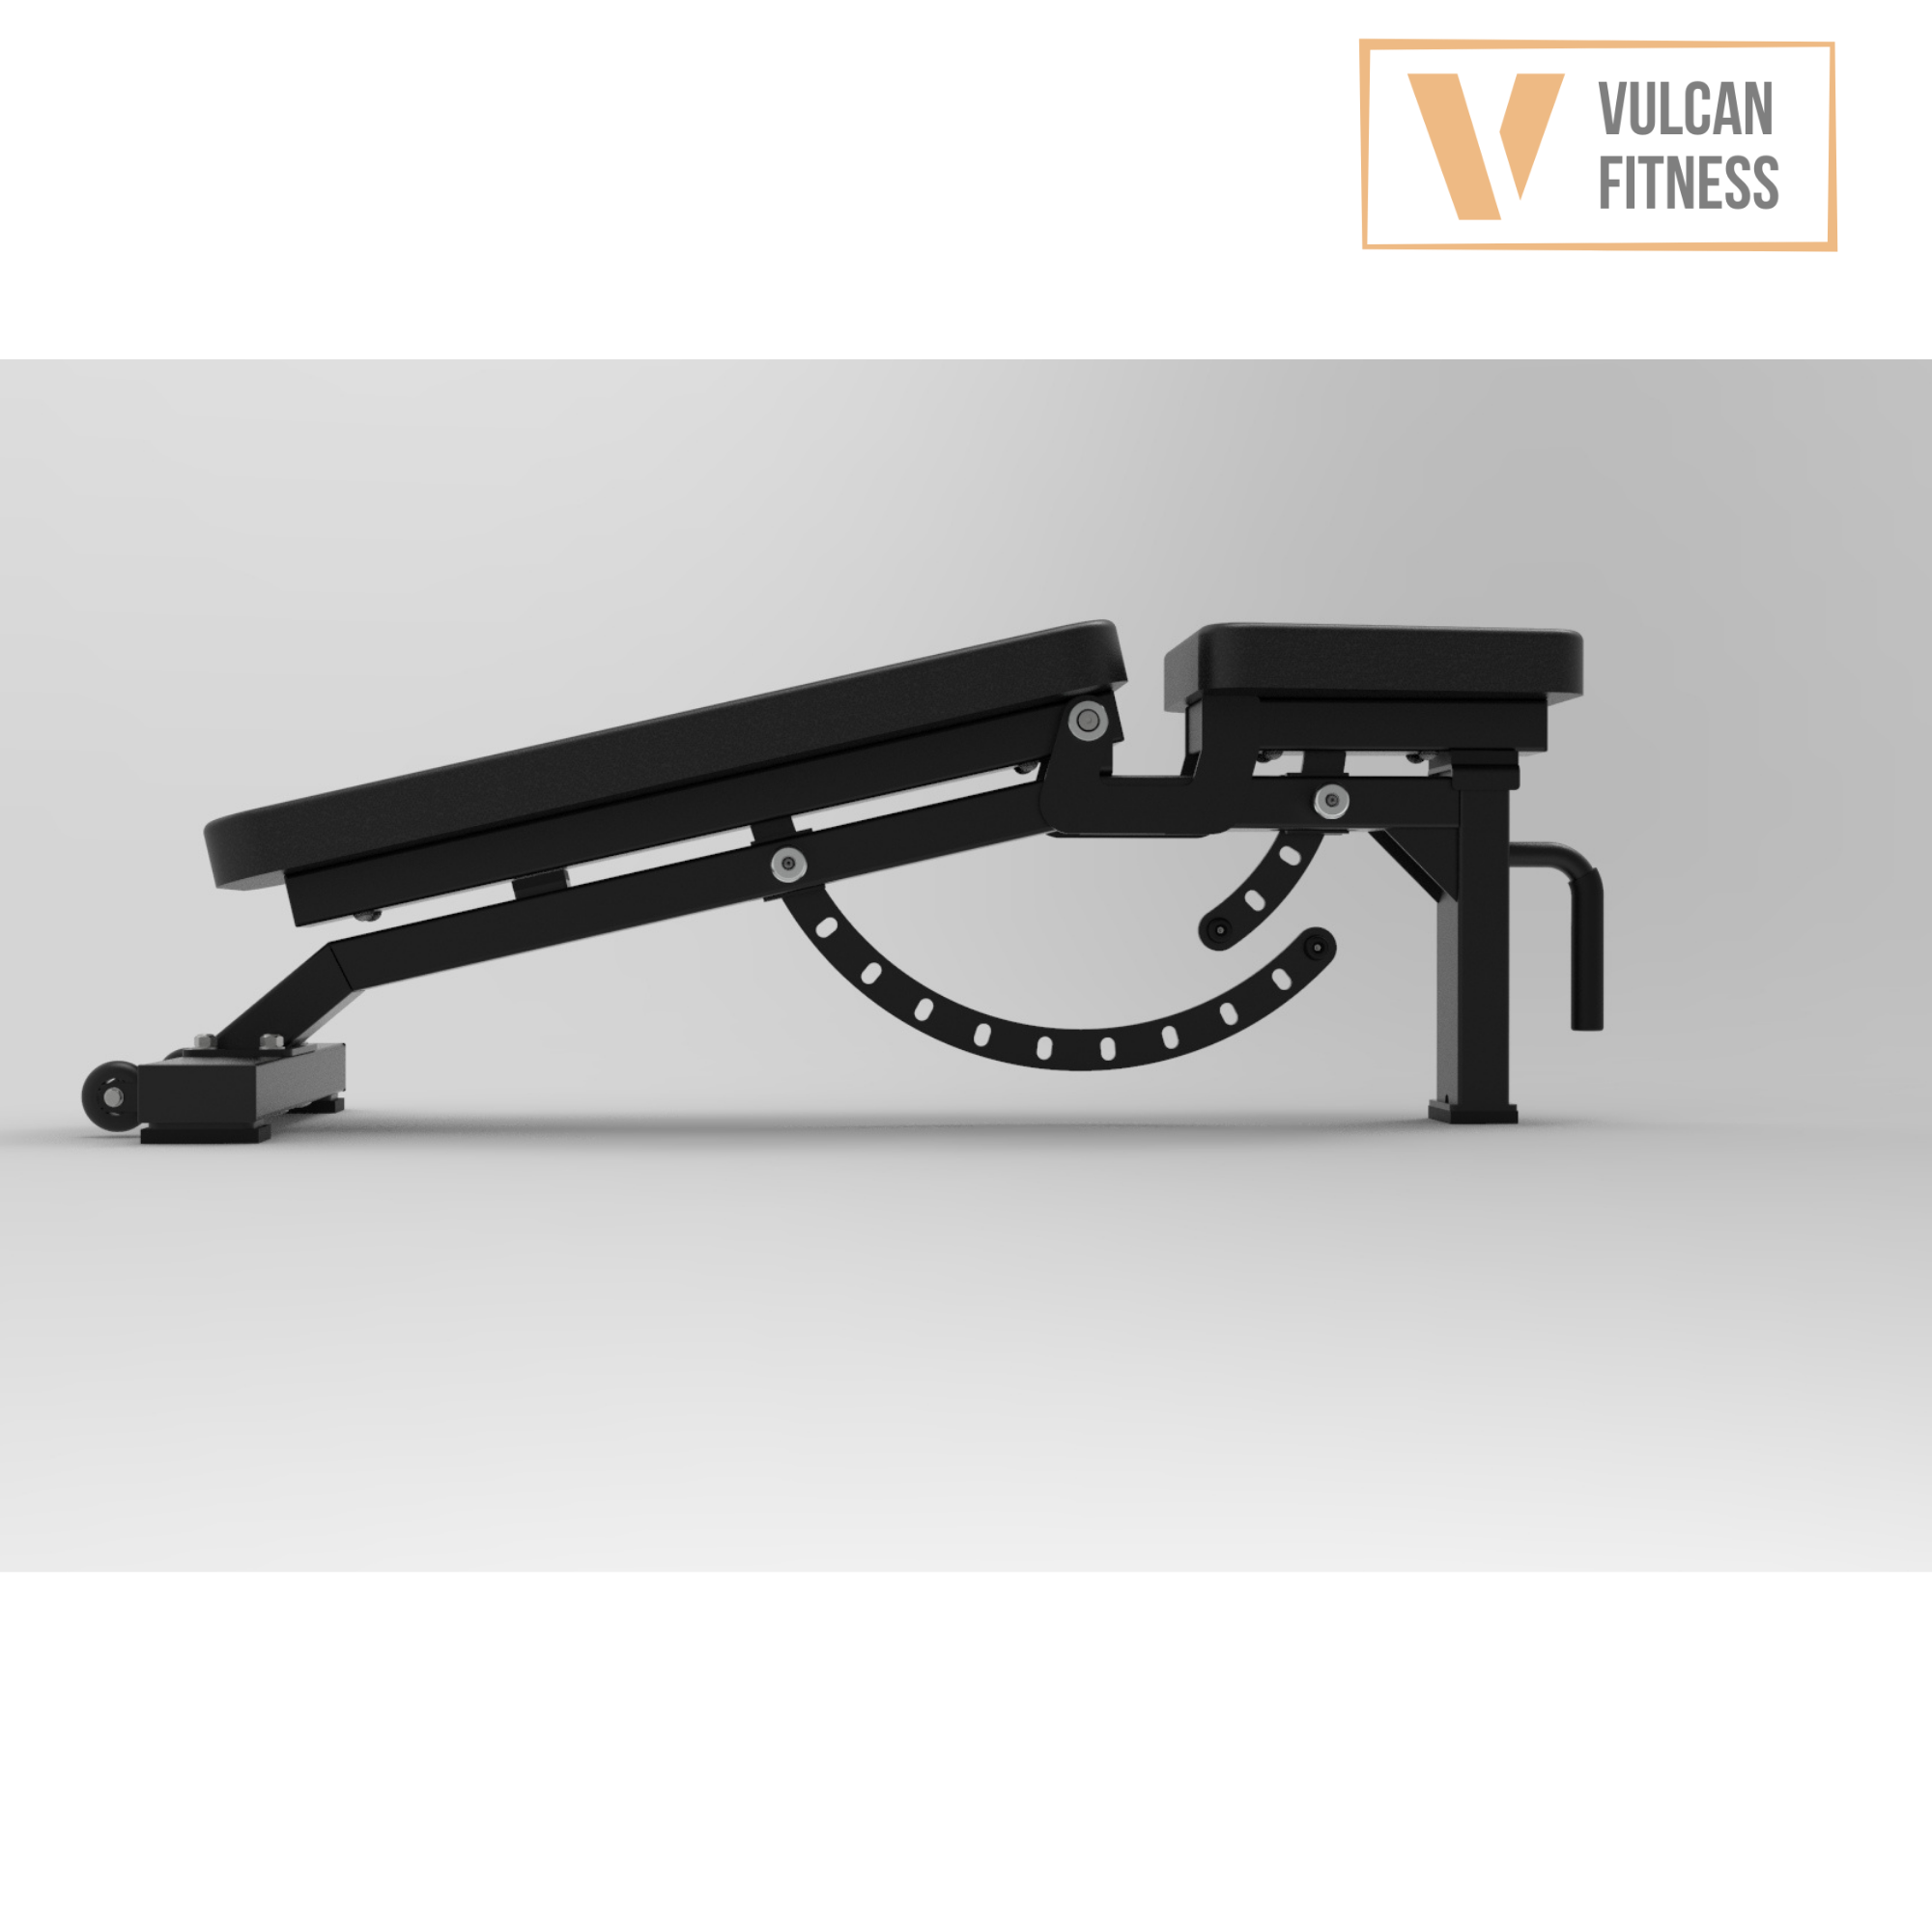 VULCAN Commercial Power Cage, Olympic Barbell, 150kg Black Bumper Weight Plates & Adjustable Bench | IN STOCK